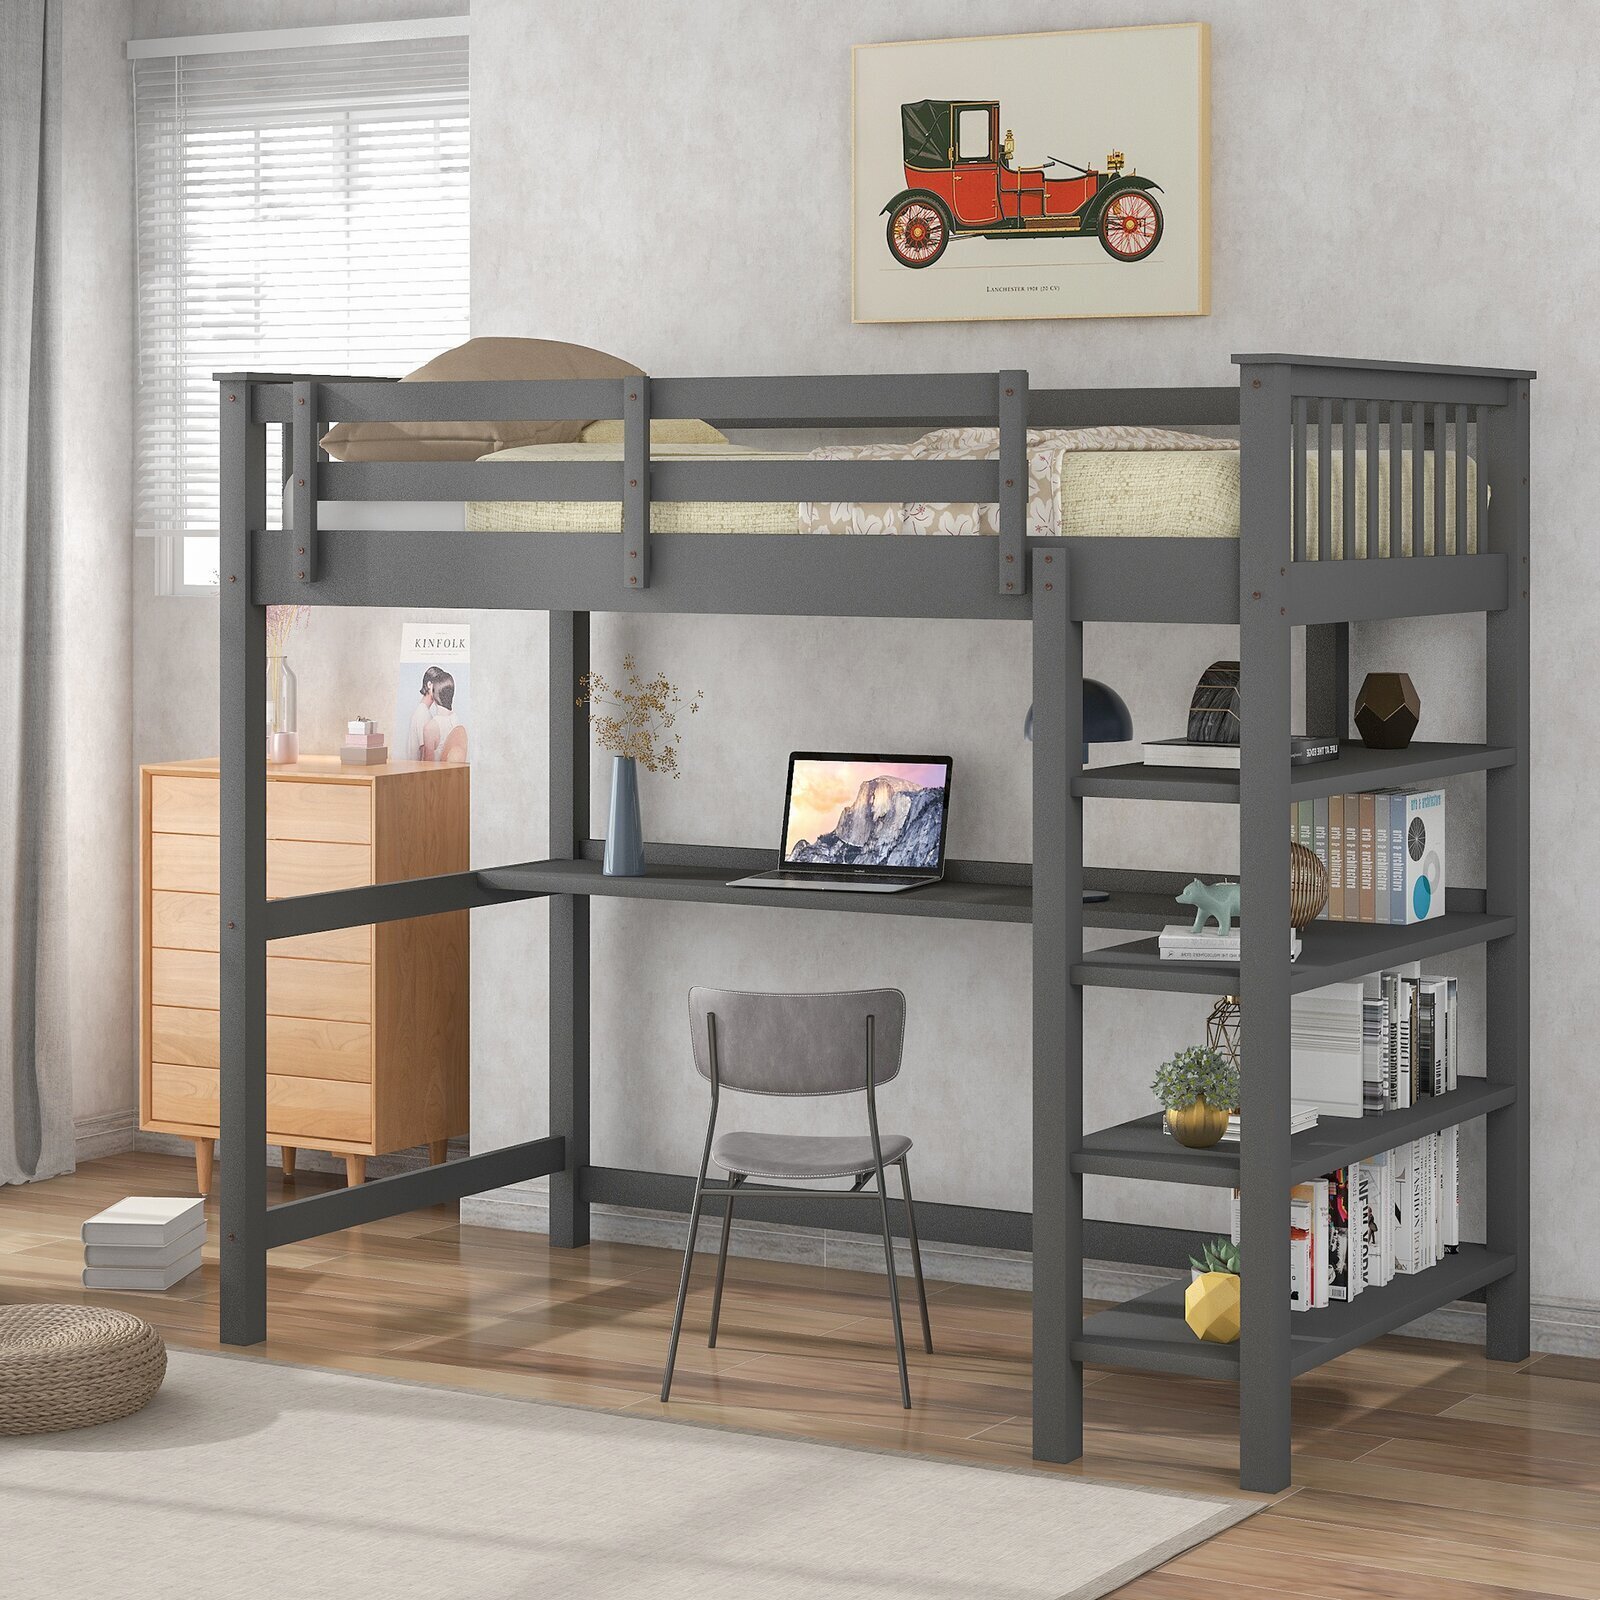 Sturdy Wooden Bunk Bed and Study Table with Shelves